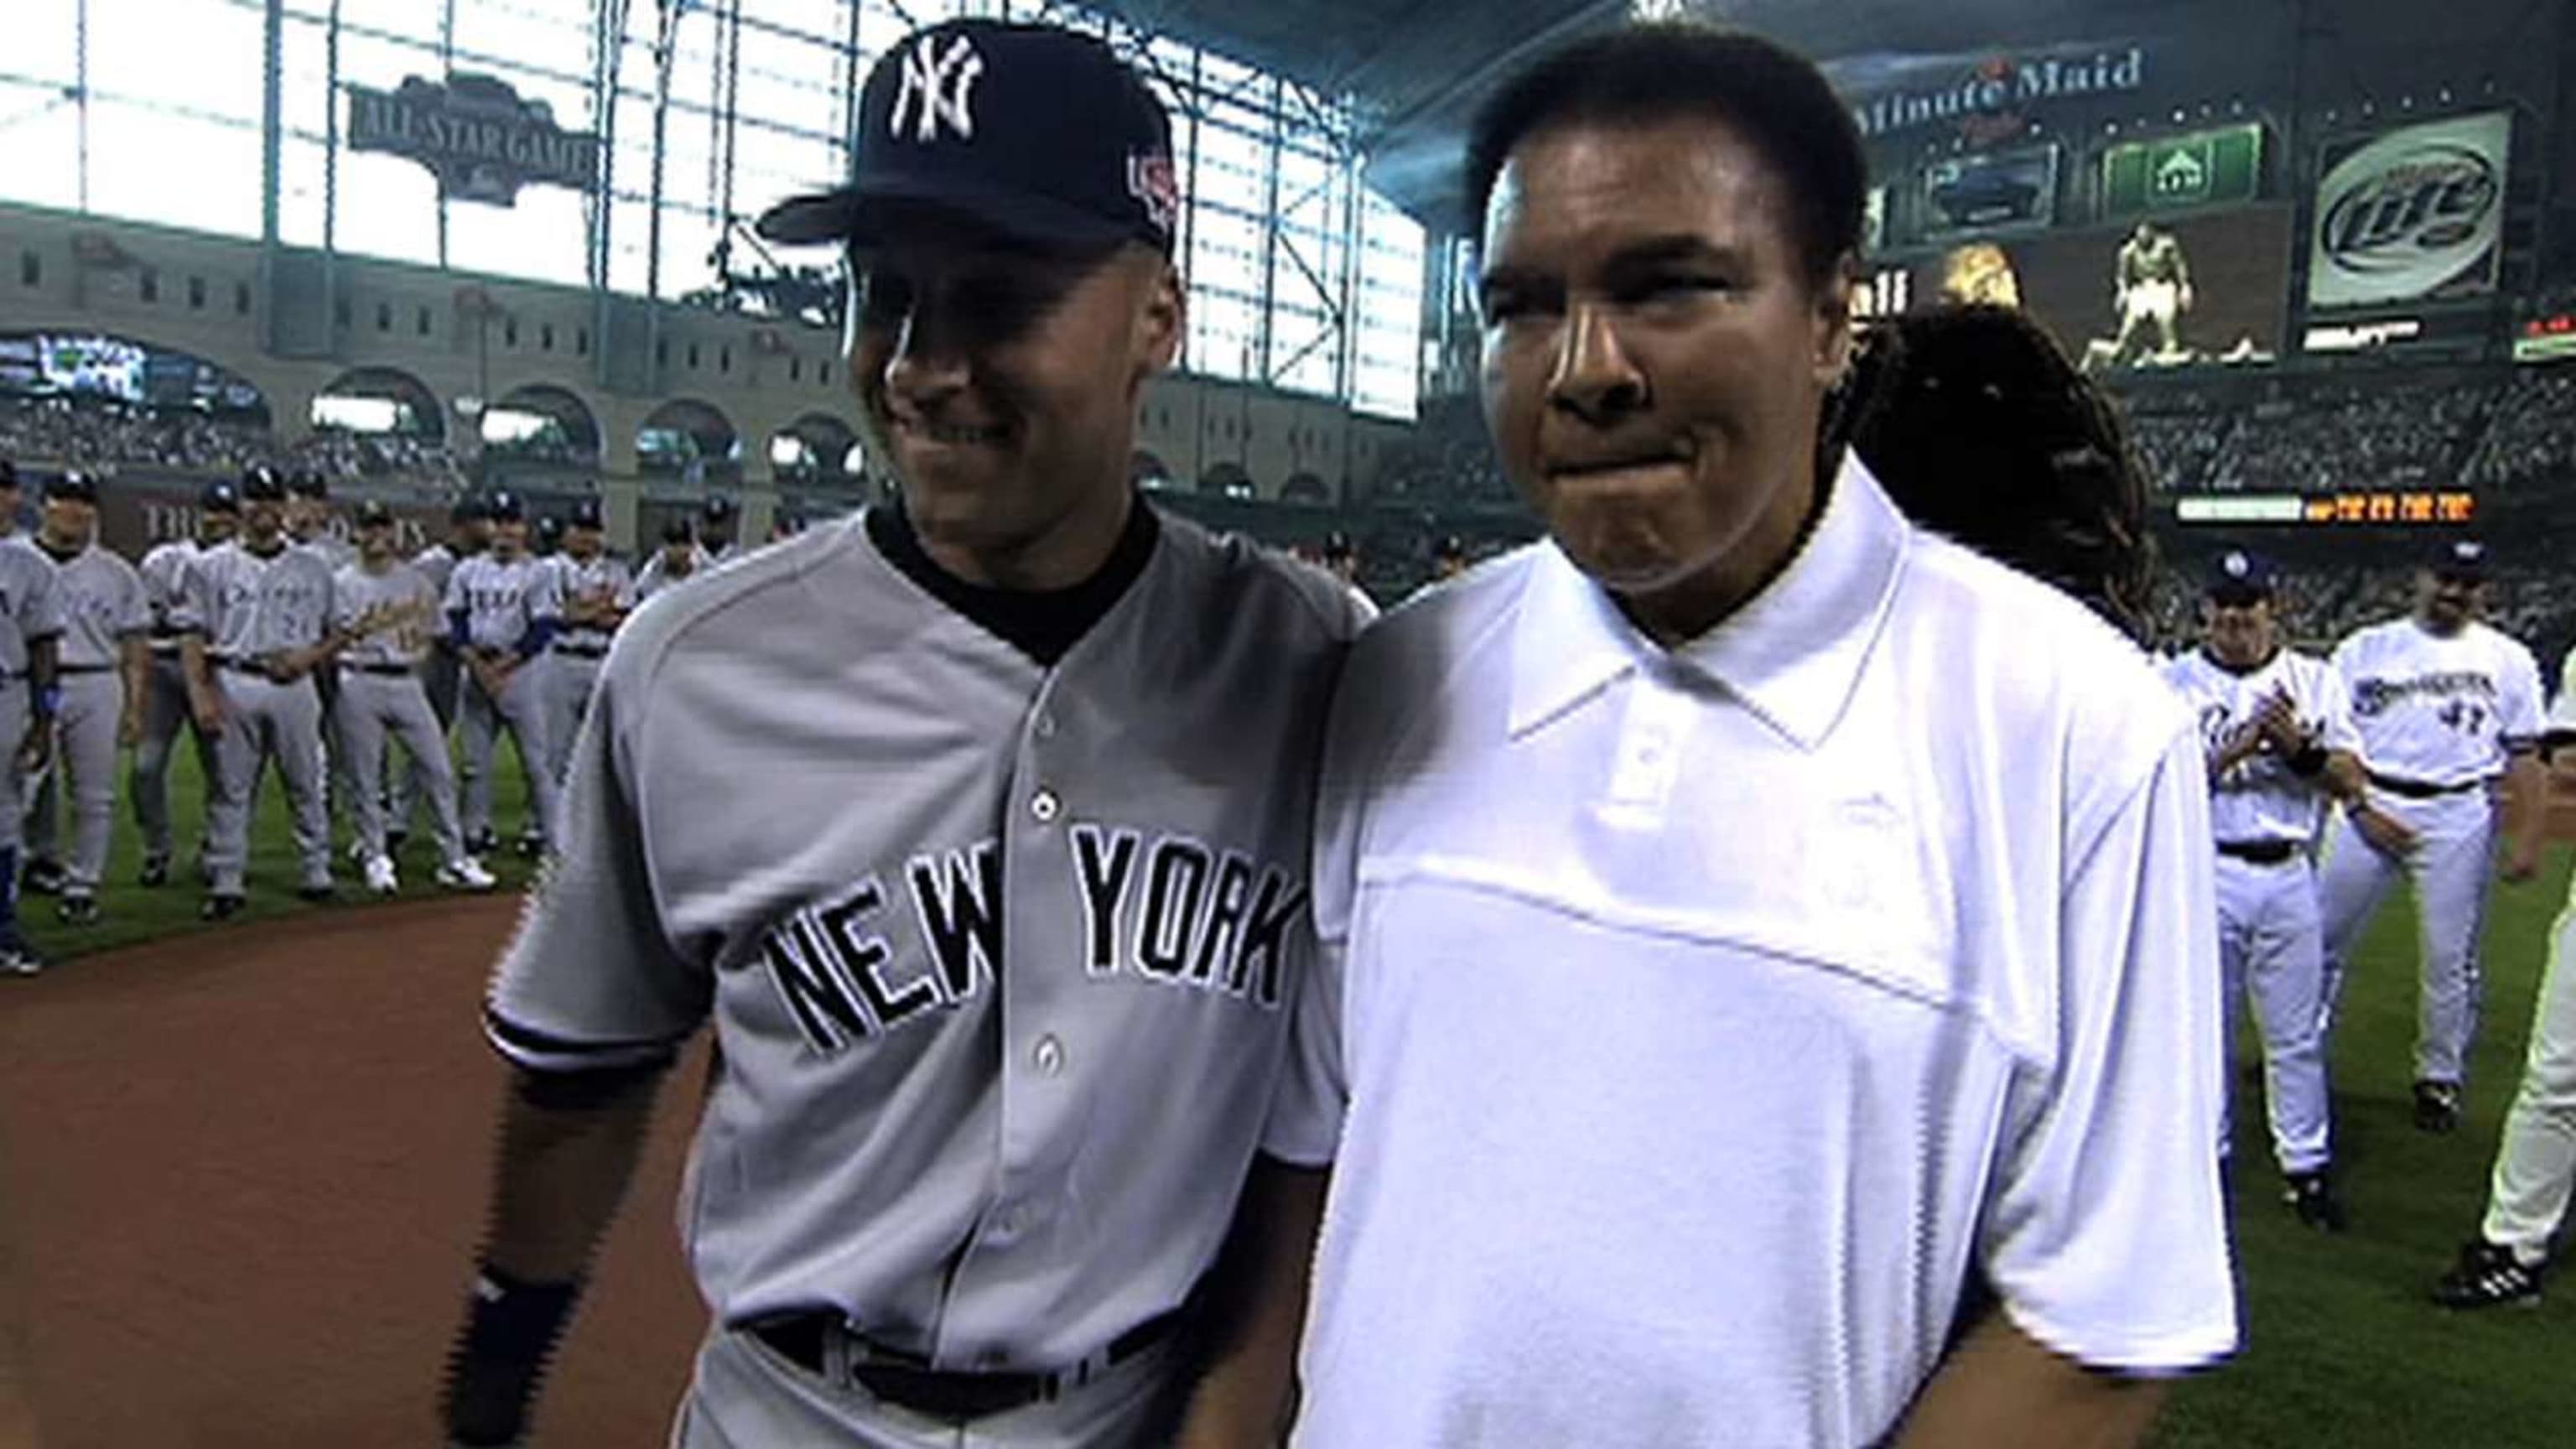 Watch Muhammad Alis legendary appearance at the 2004 All-Star Game MLB 